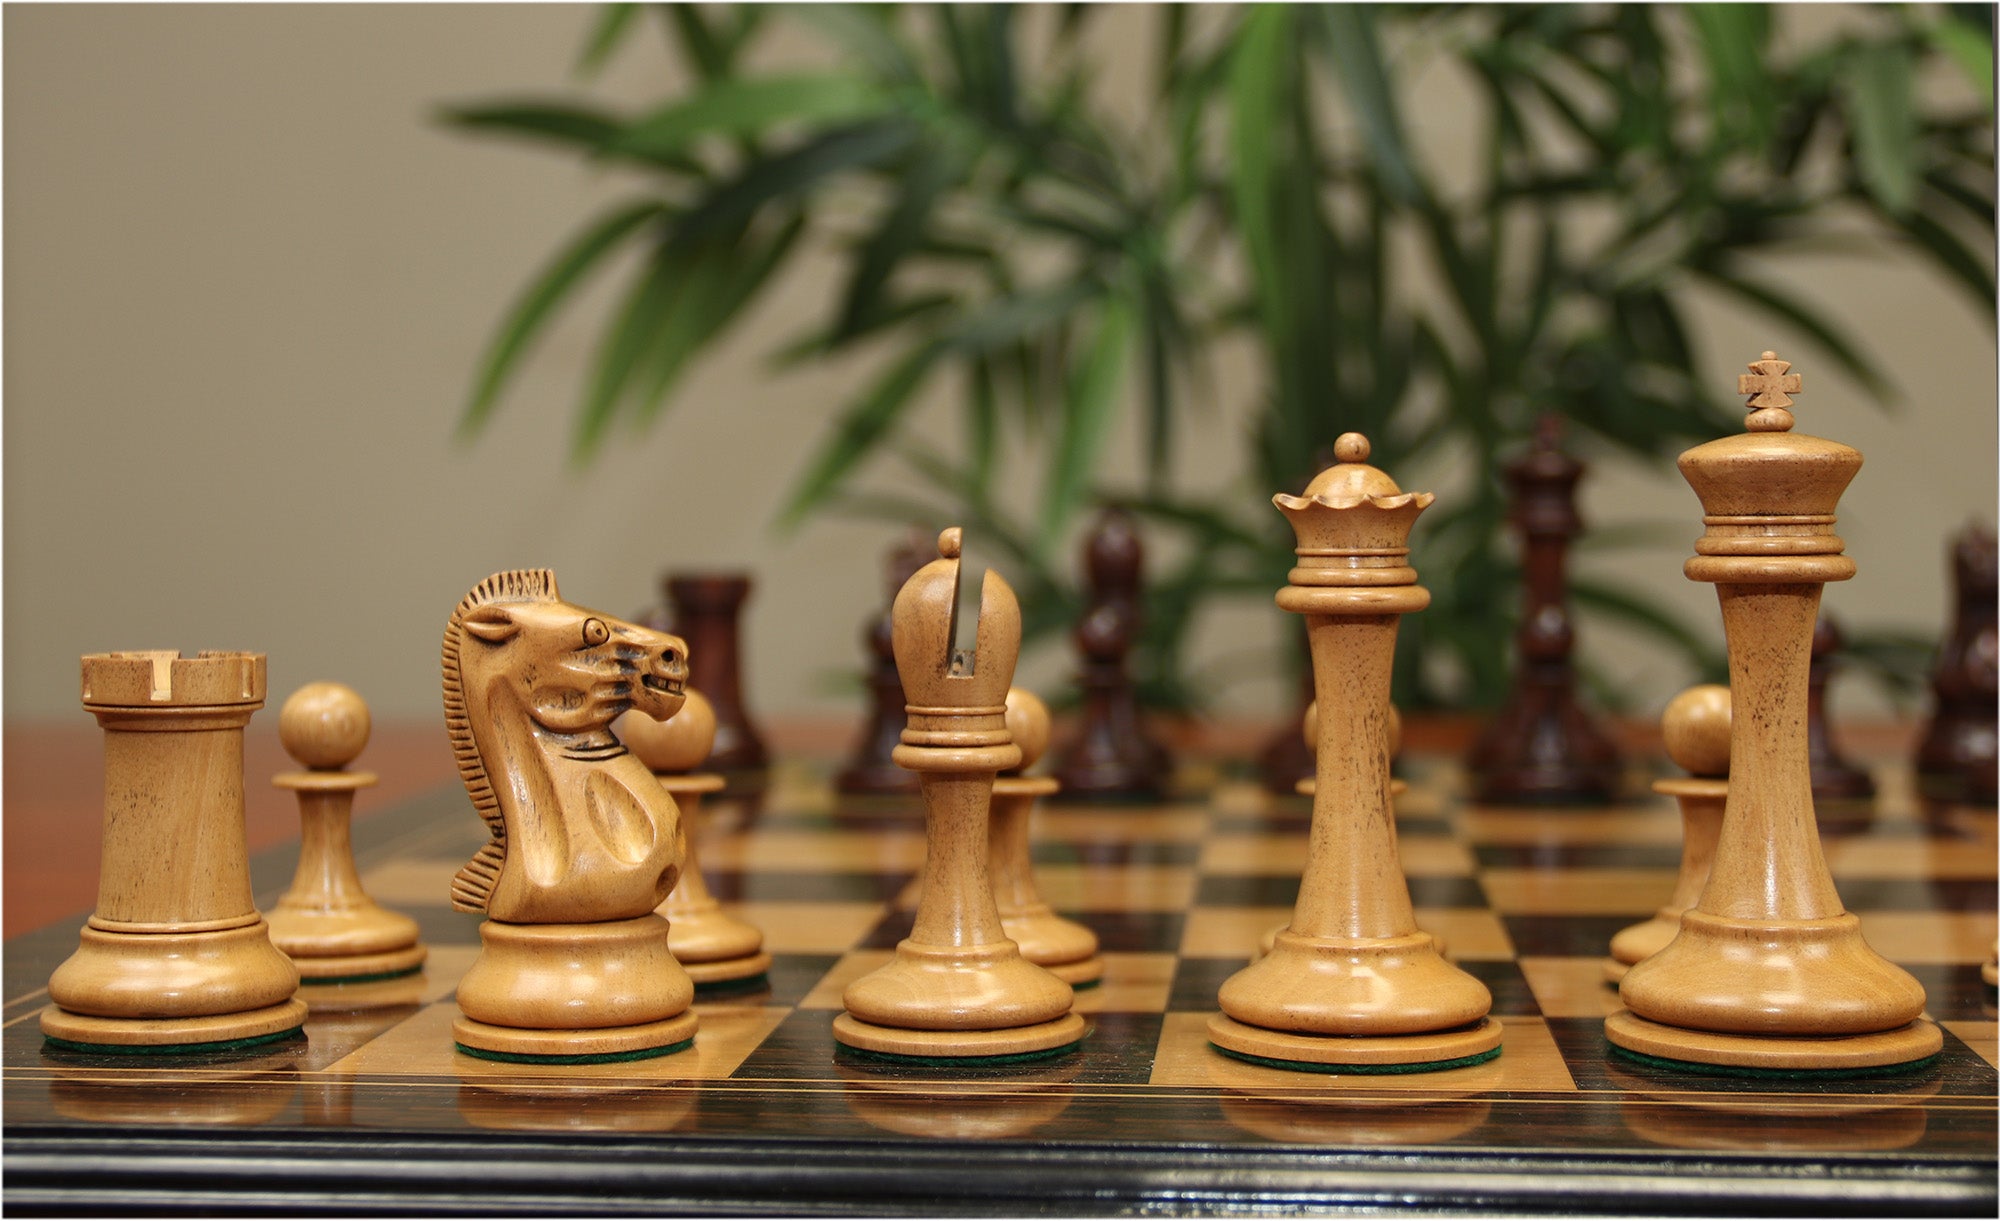 B & Company Reproduction 4.4" Chess set in Distressed/Mahogany Stained Boxwood